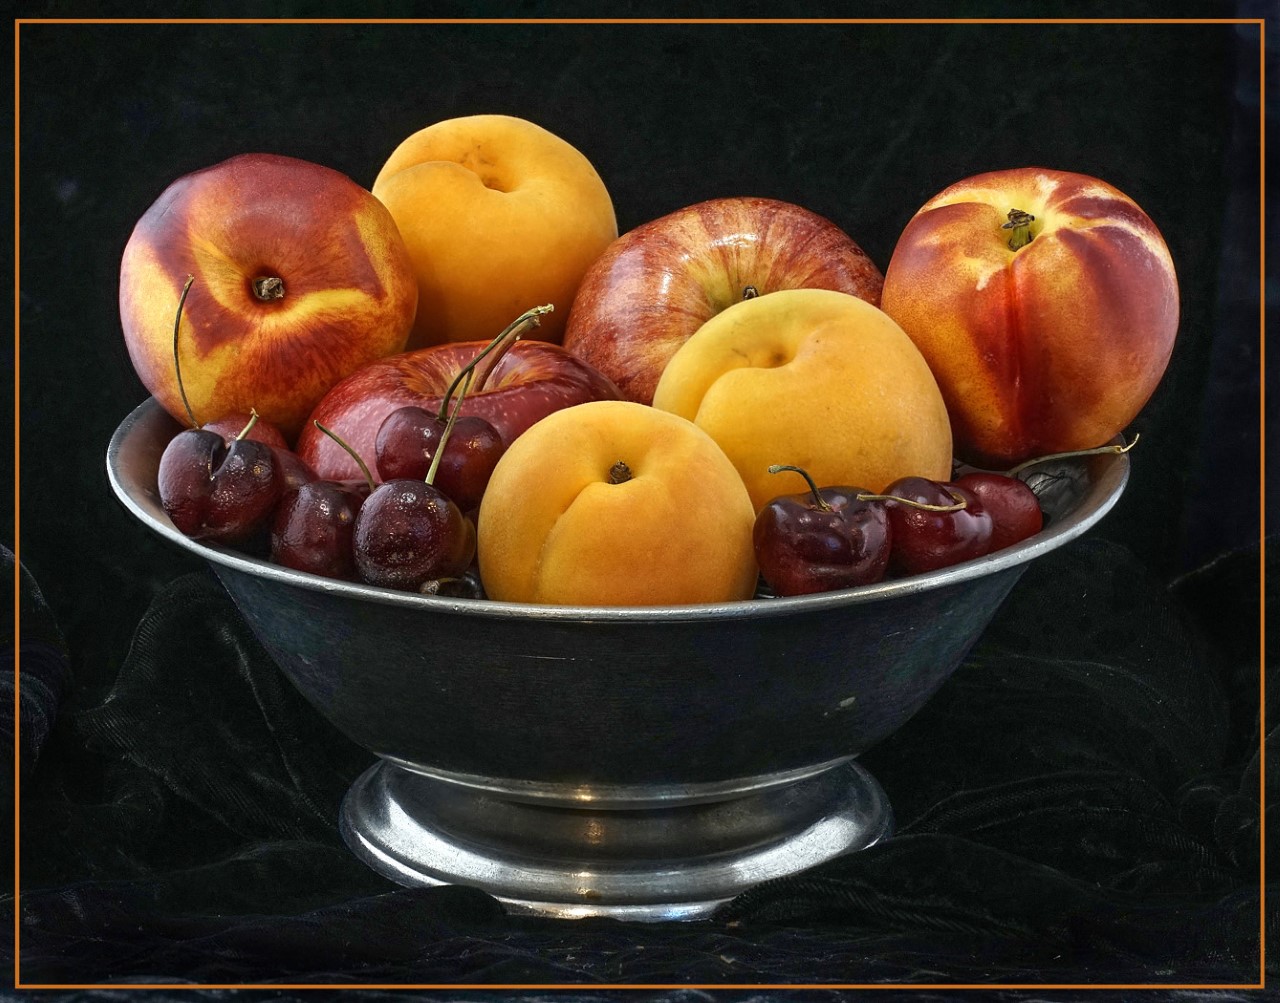 Fruit Bowl by Neal R. Thompson, M.D.